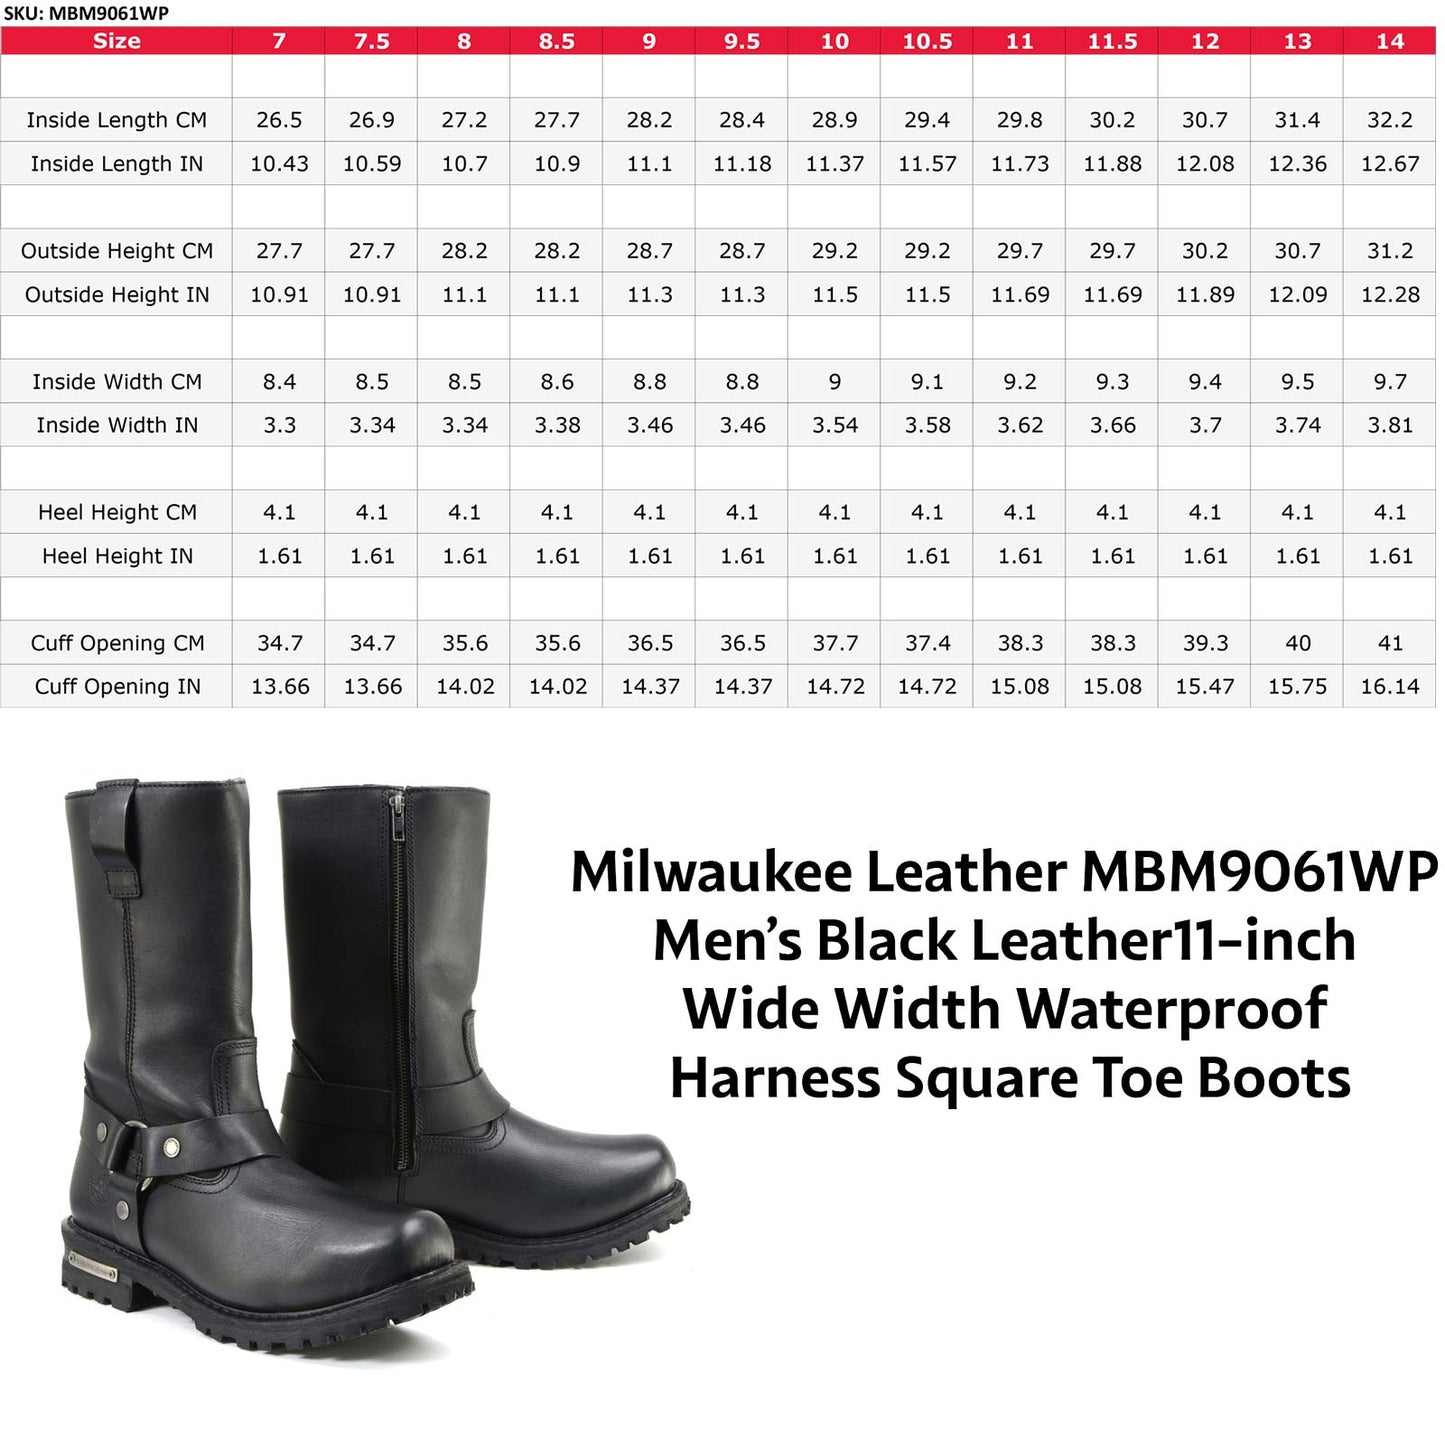 Milwaukee Leather Men’s Black Waterproof Boots 11-inch Wide Width Square Toe with Harness and Zipper MBM9061WP